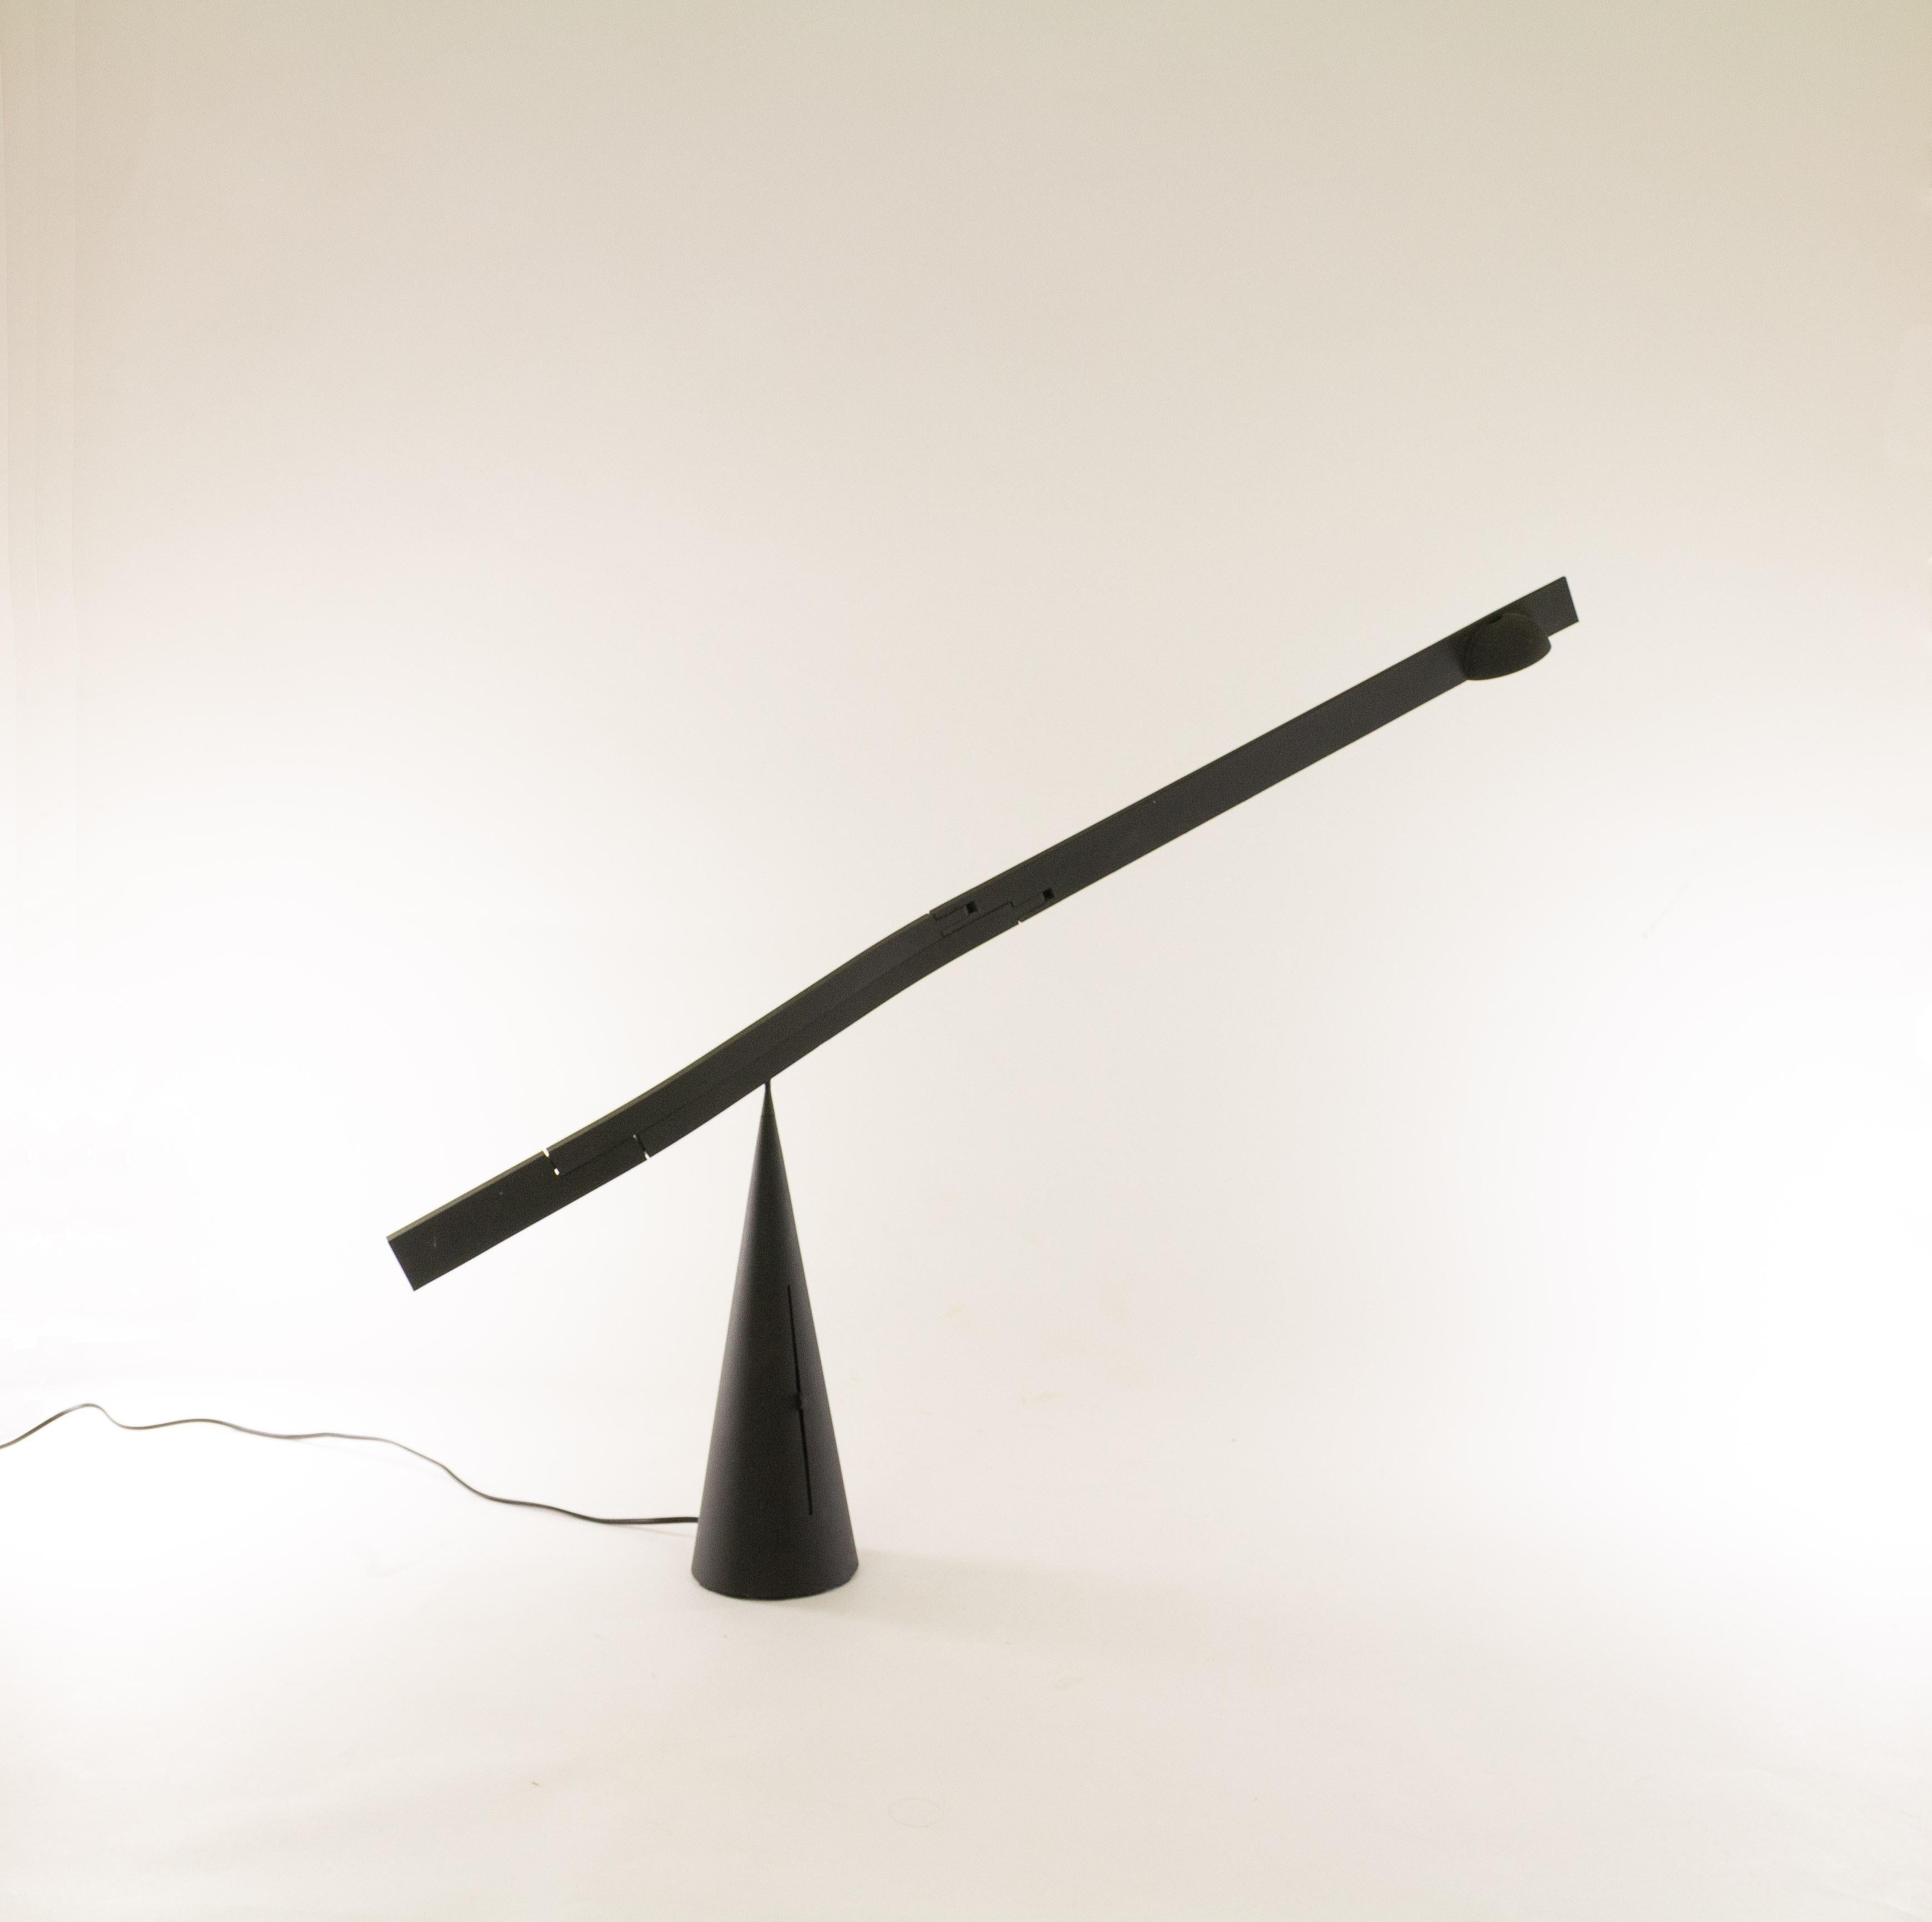 Tabla table lamp by Mario Barbaglia and Marco Colombo for Italiana Luce, 1988-1990.

Exceptional sculptural design with an adjustable and extendable arm that gracefully pivots on the peak of the cone base. The transformer of this halogen lamp